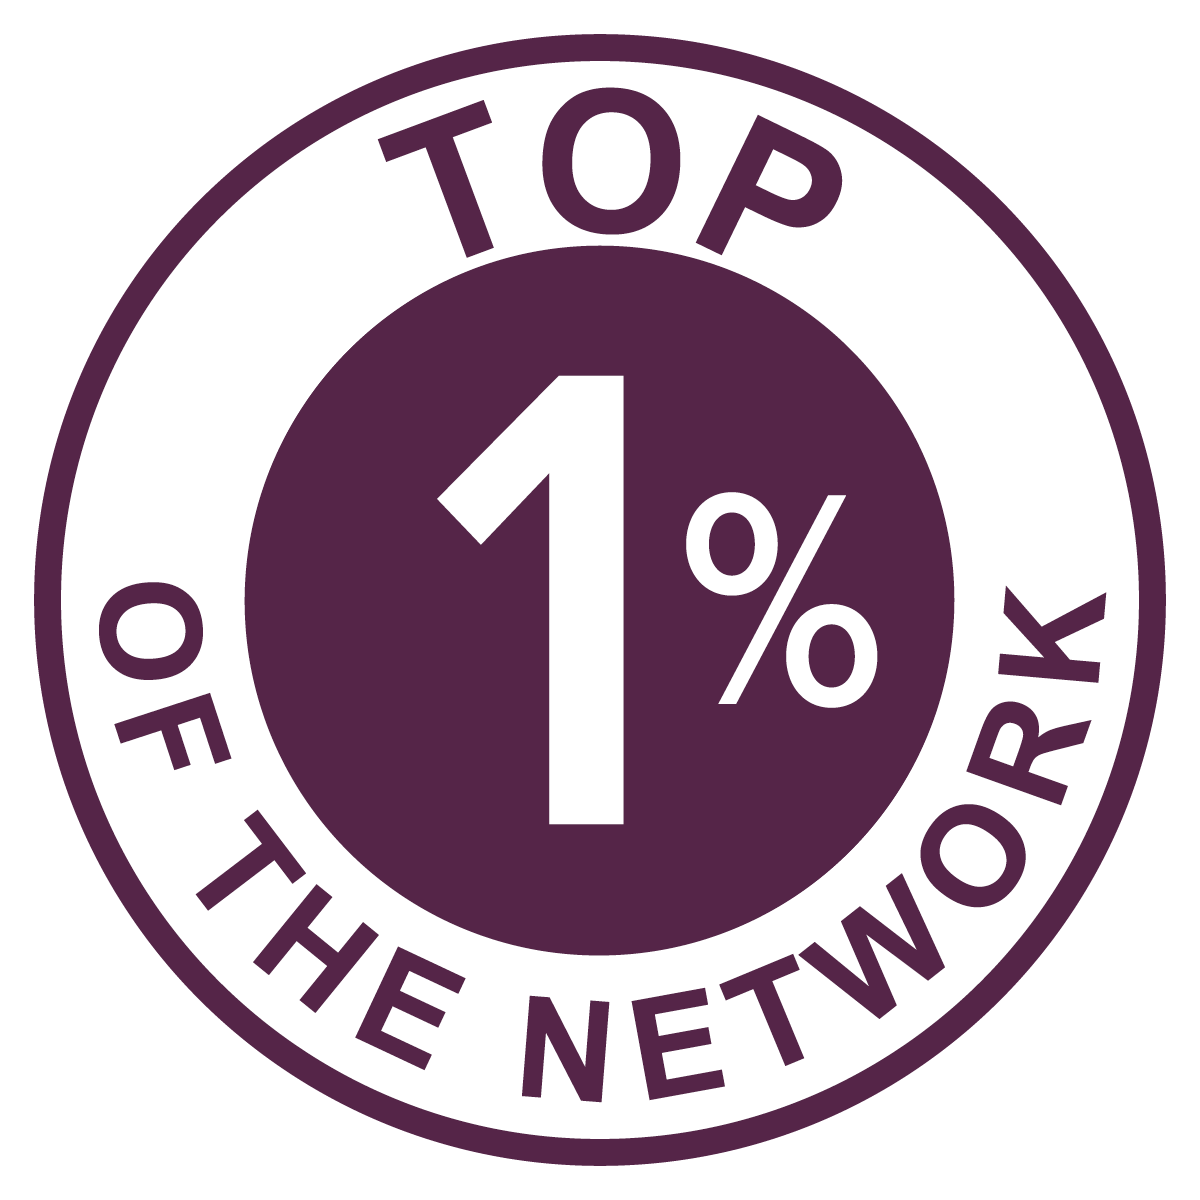 Top 1% of the network